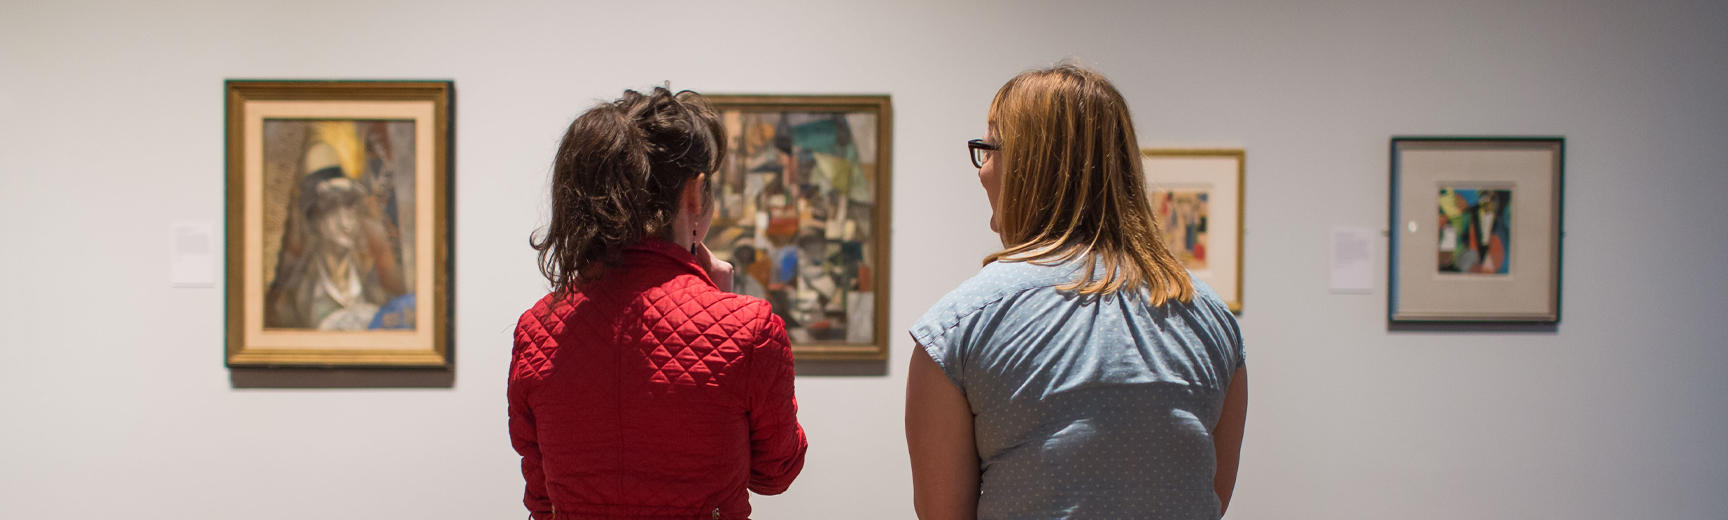 The backs of two women who look at four modern art paintings hung on a neutral wall